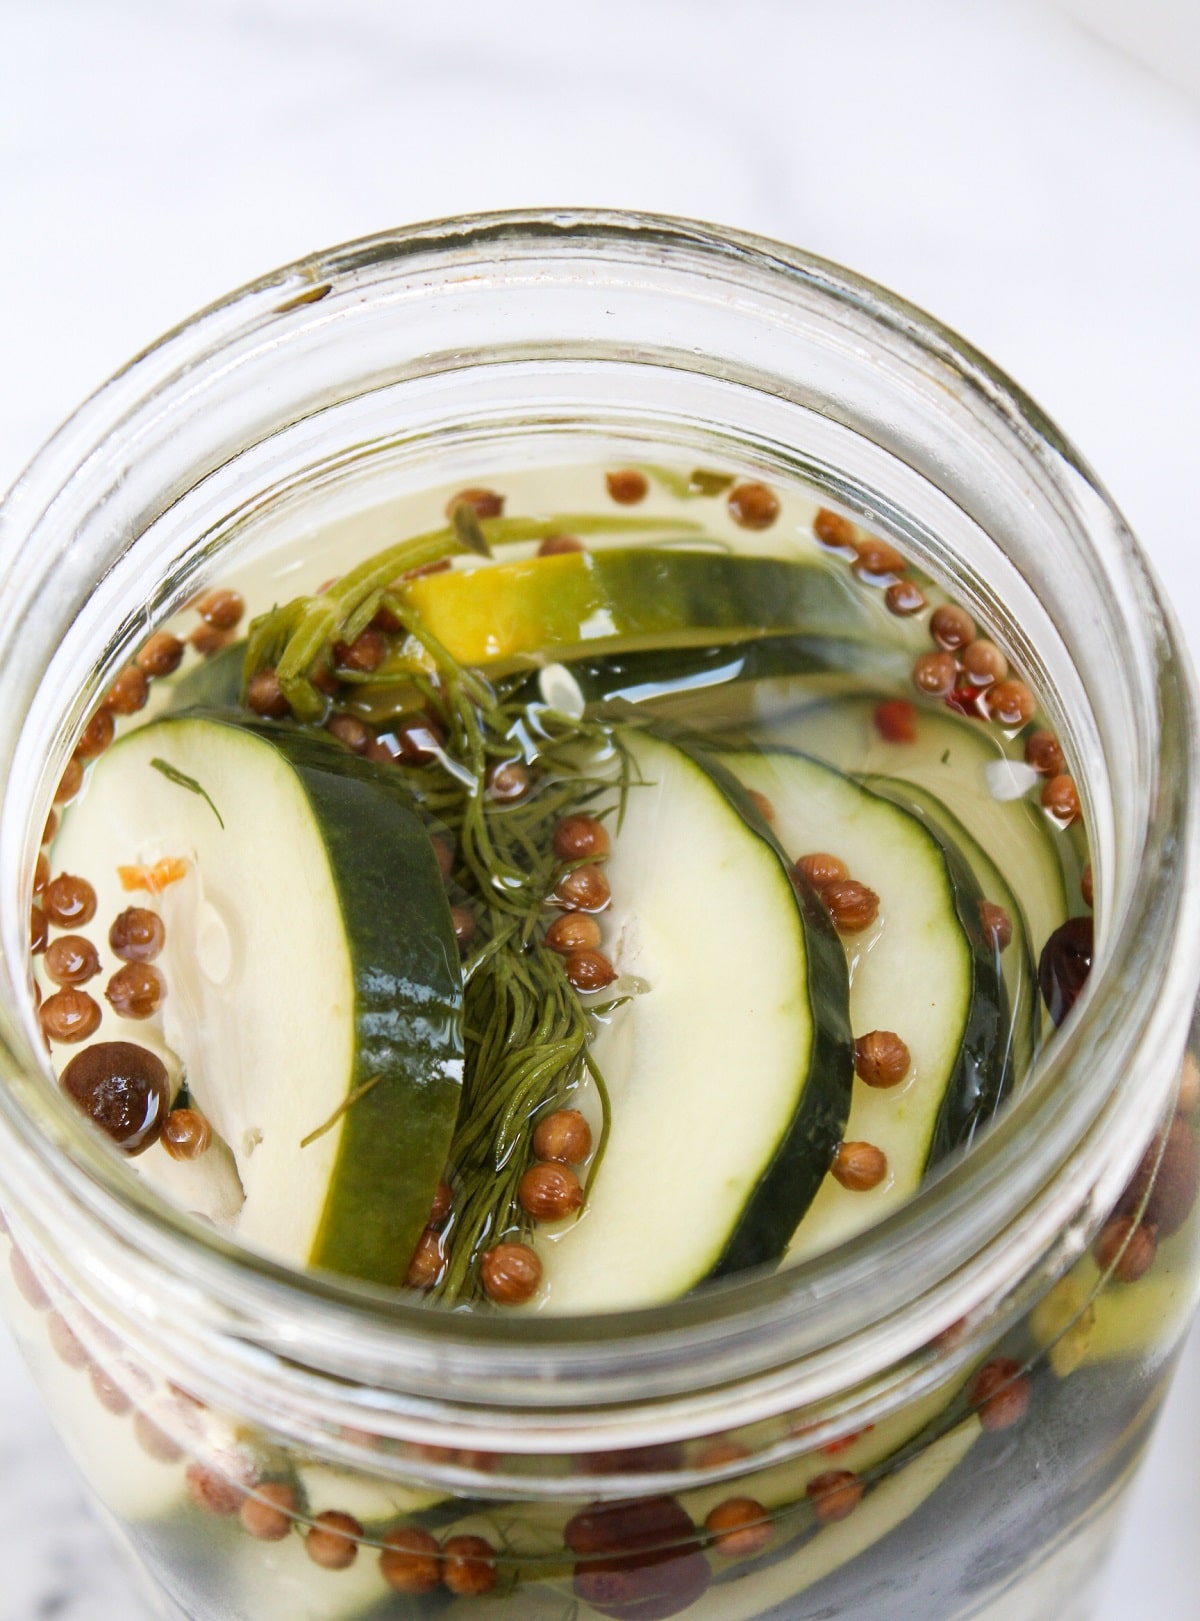 sliced easy refrigerator dill pickles in an unsealed glass jar 